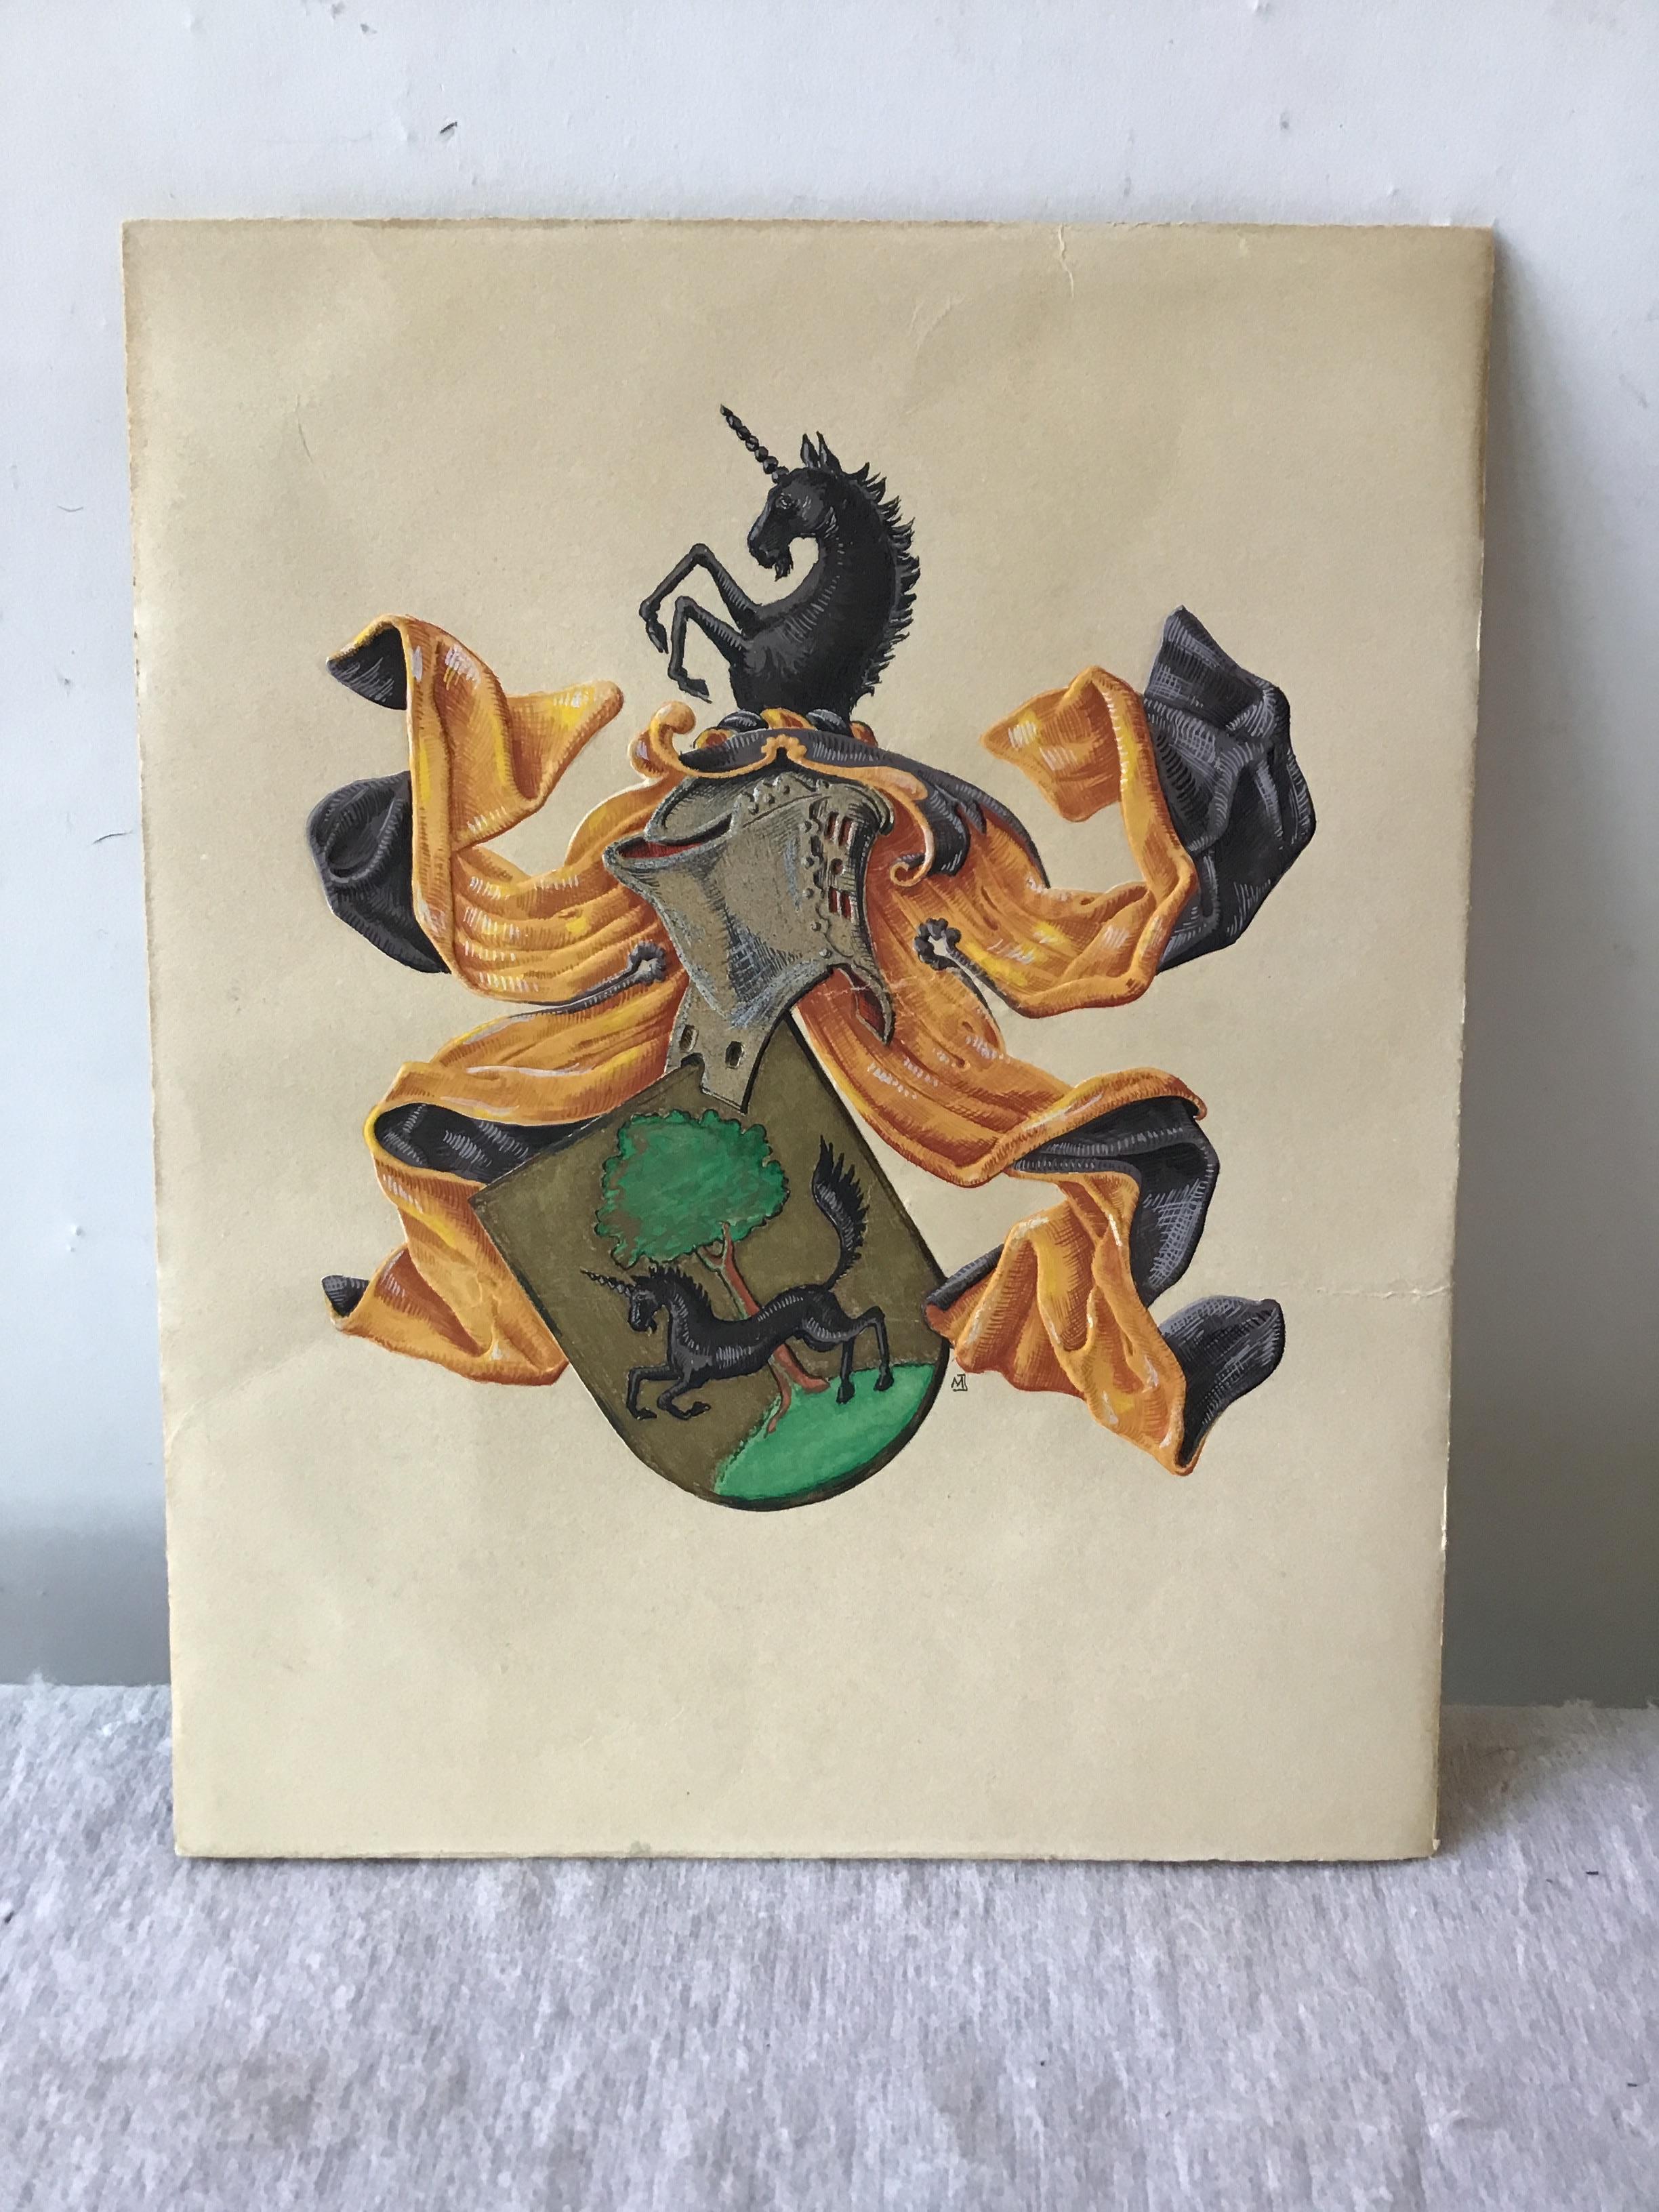 Painting of crest on paper dated 1947.